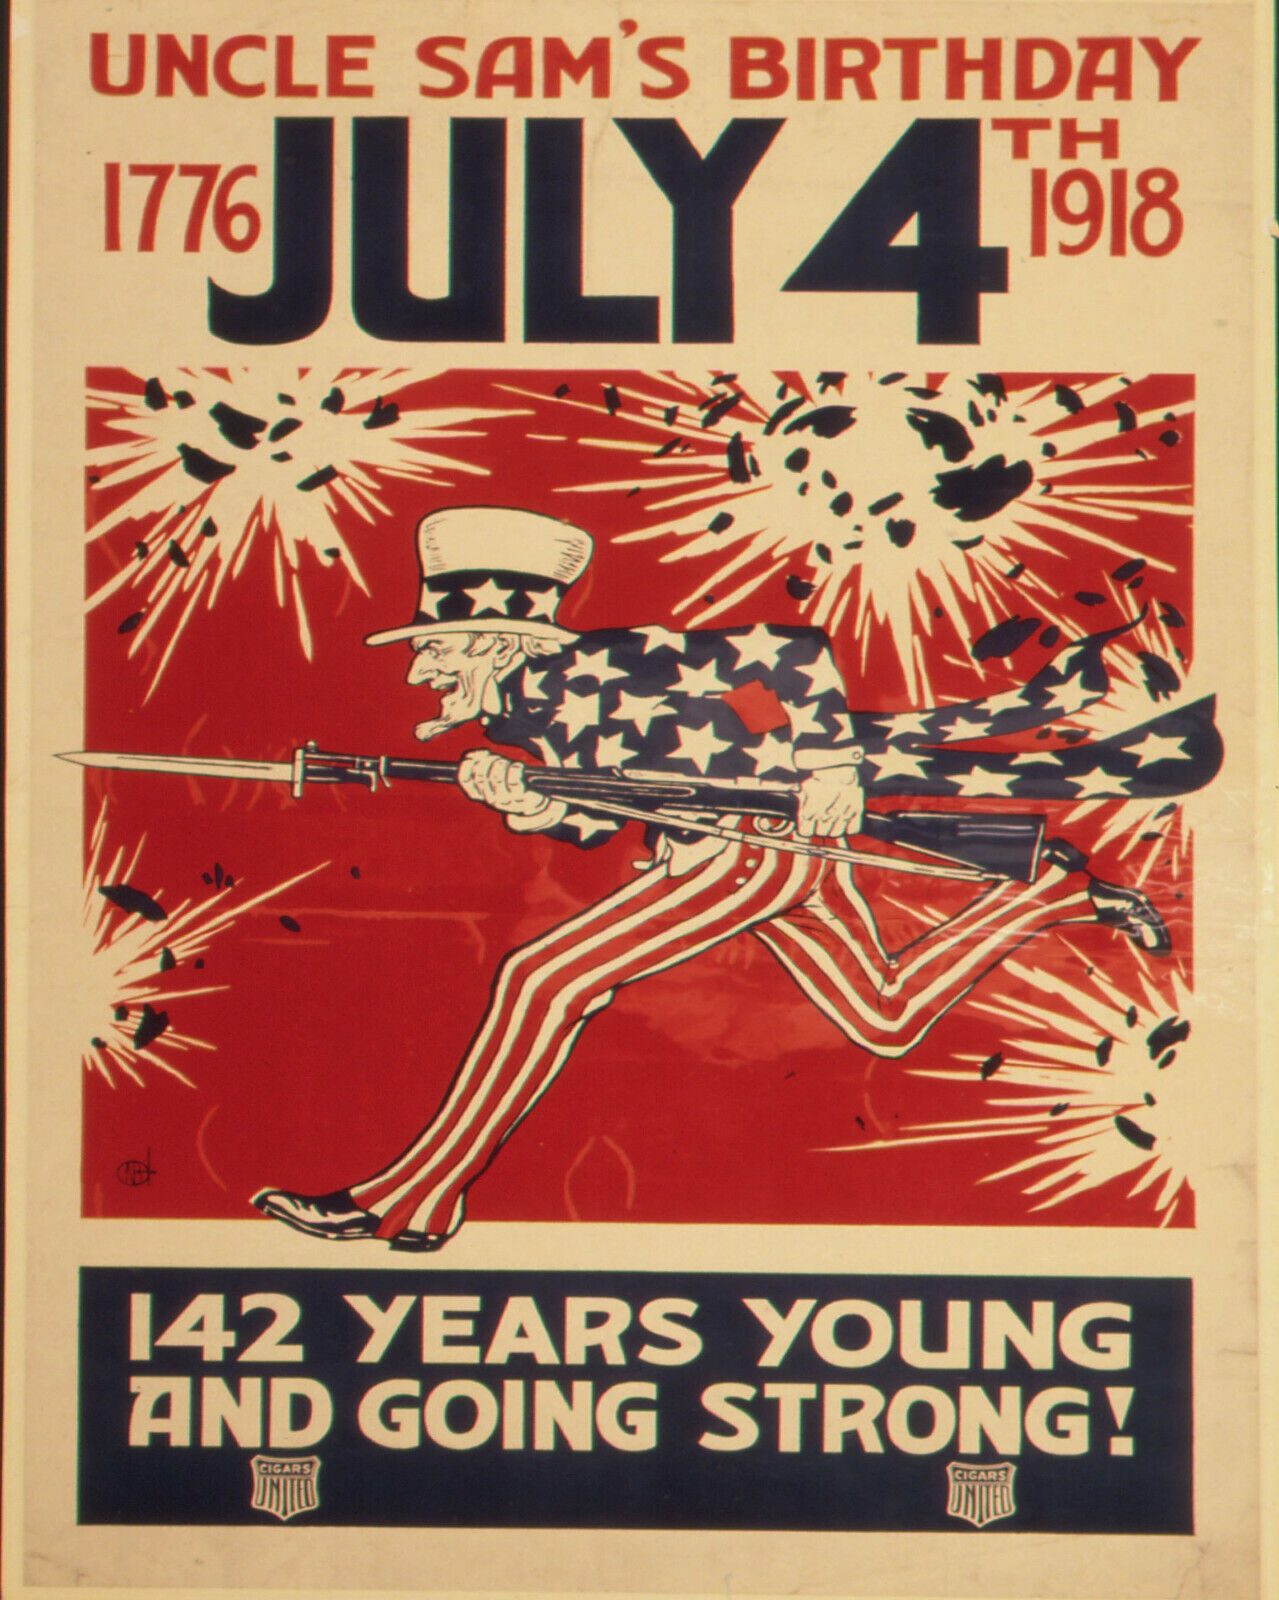 WW1 War Time Poster 8x10 Photo Uncle Sam's Birthday 1776-July 4th 1918 142 Years